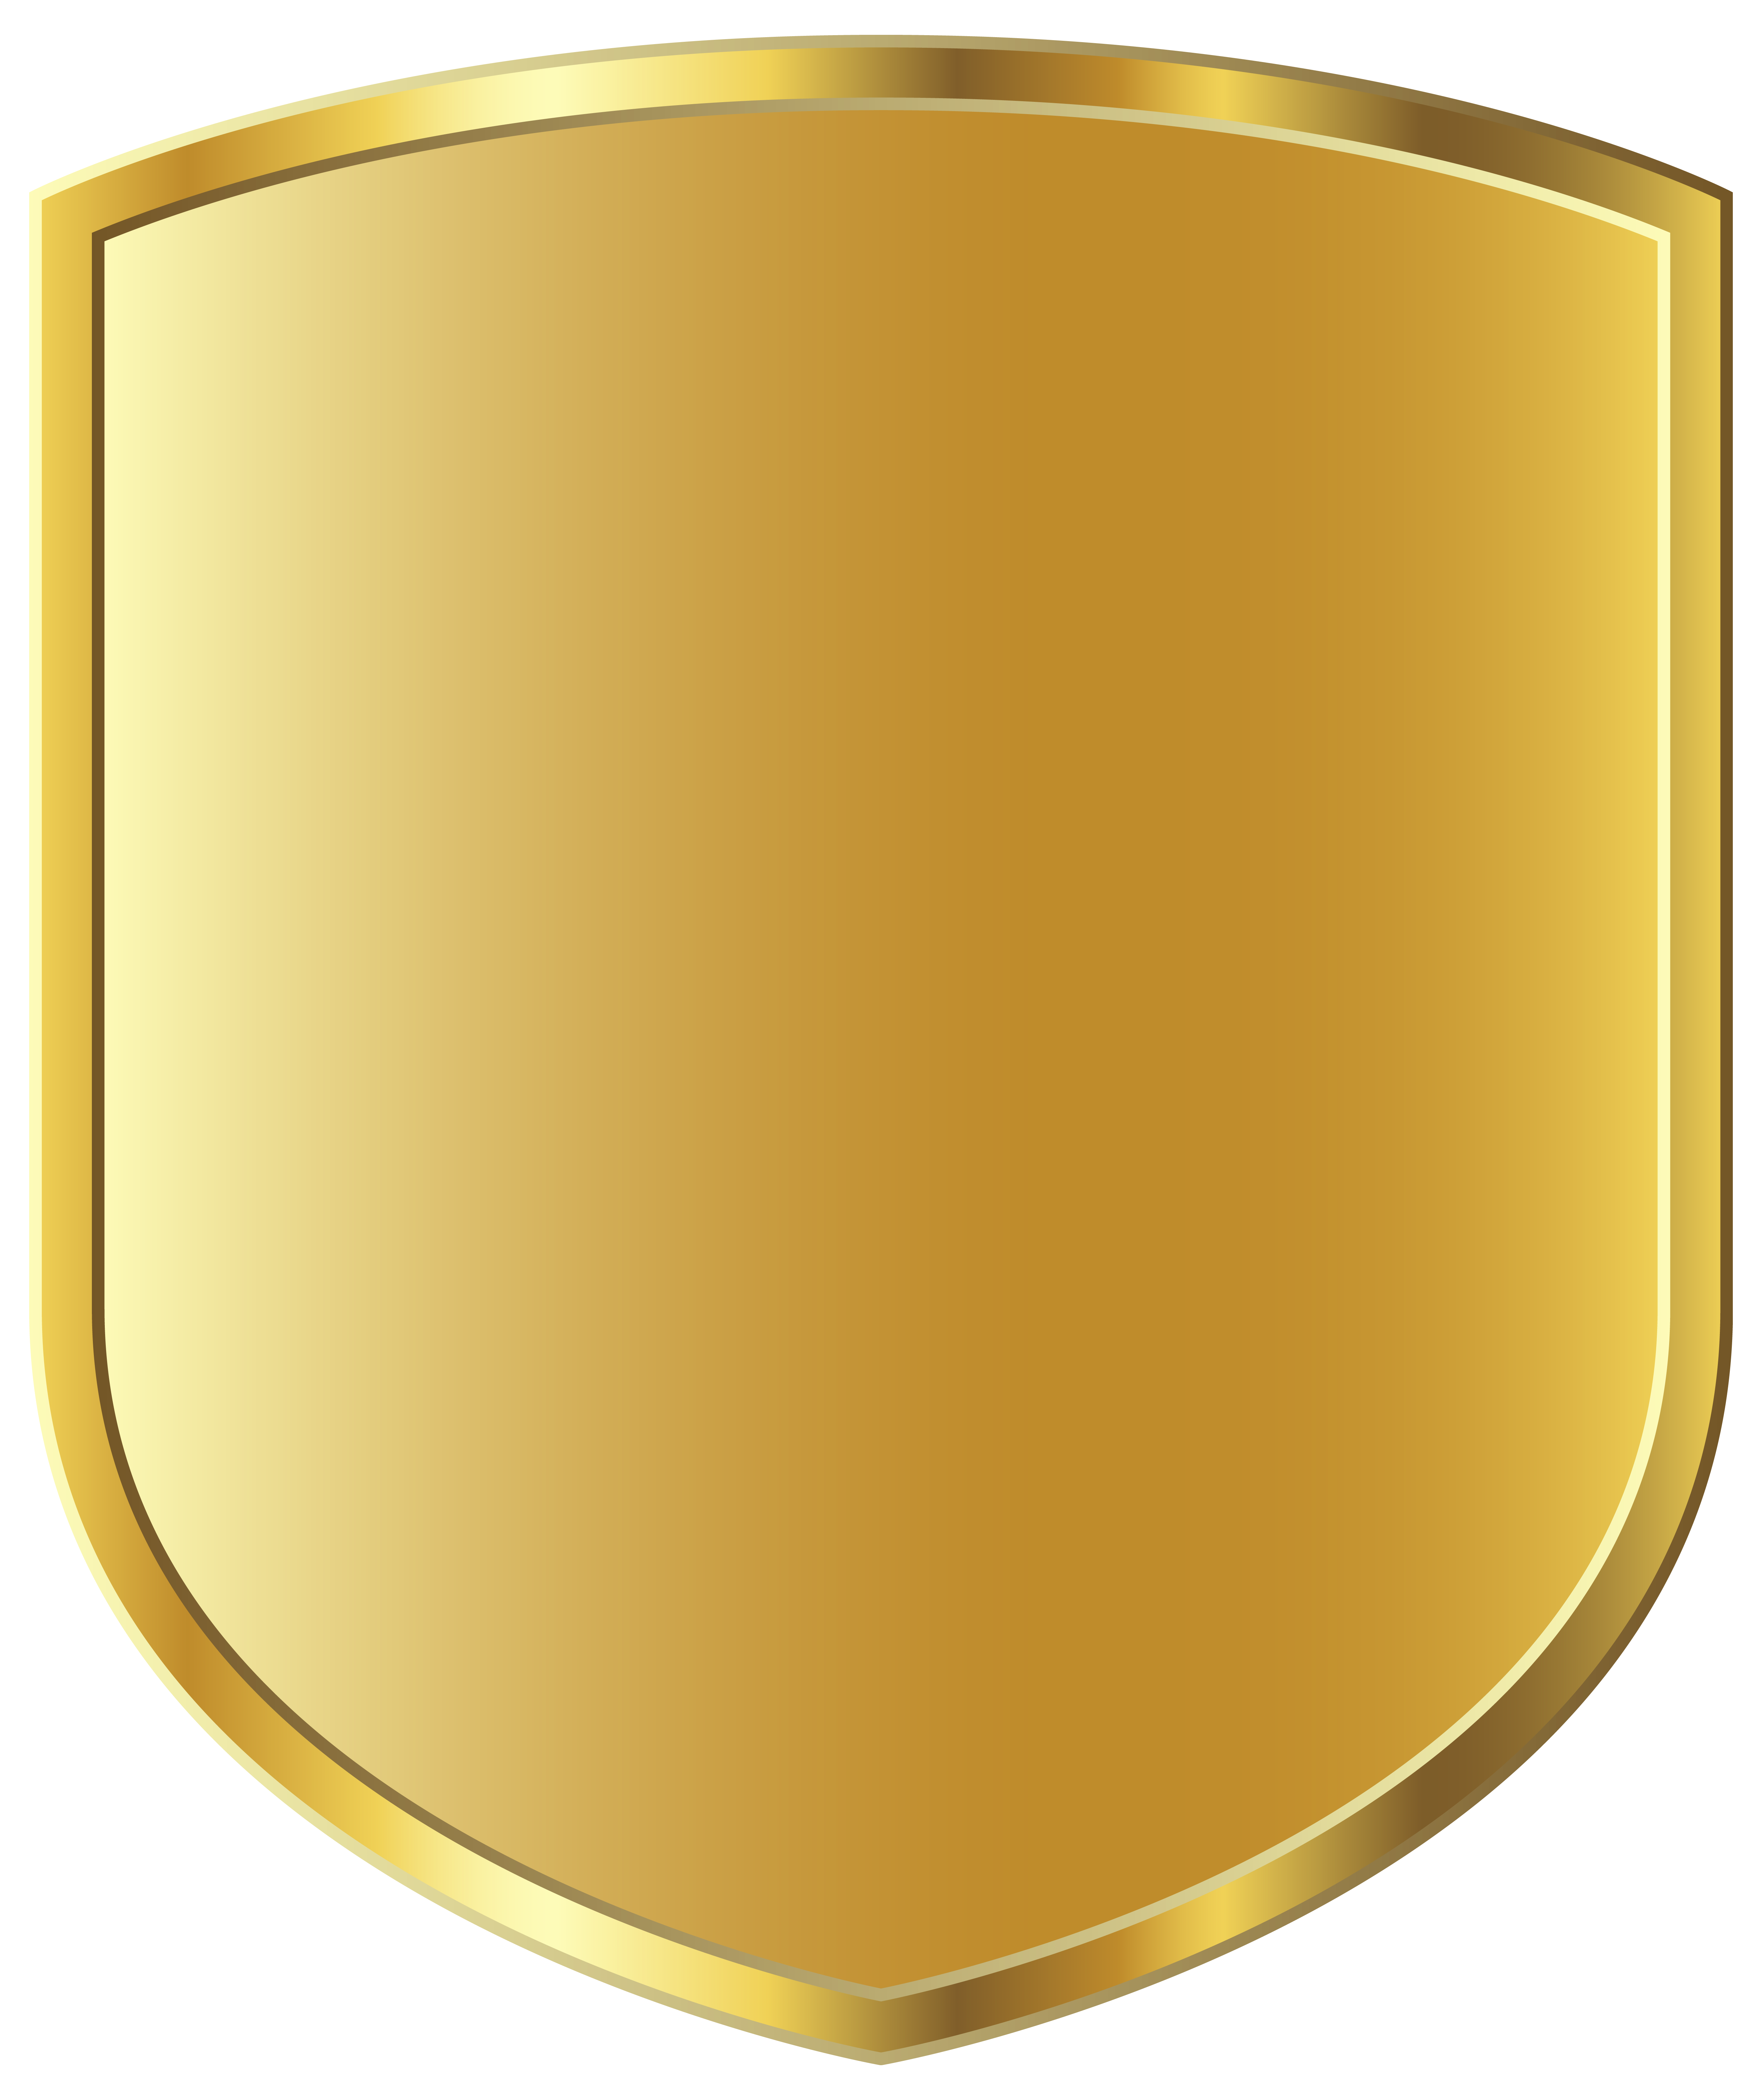 Gold Badge Template PNG Picture | Gallery Yopriceville - High-Quality